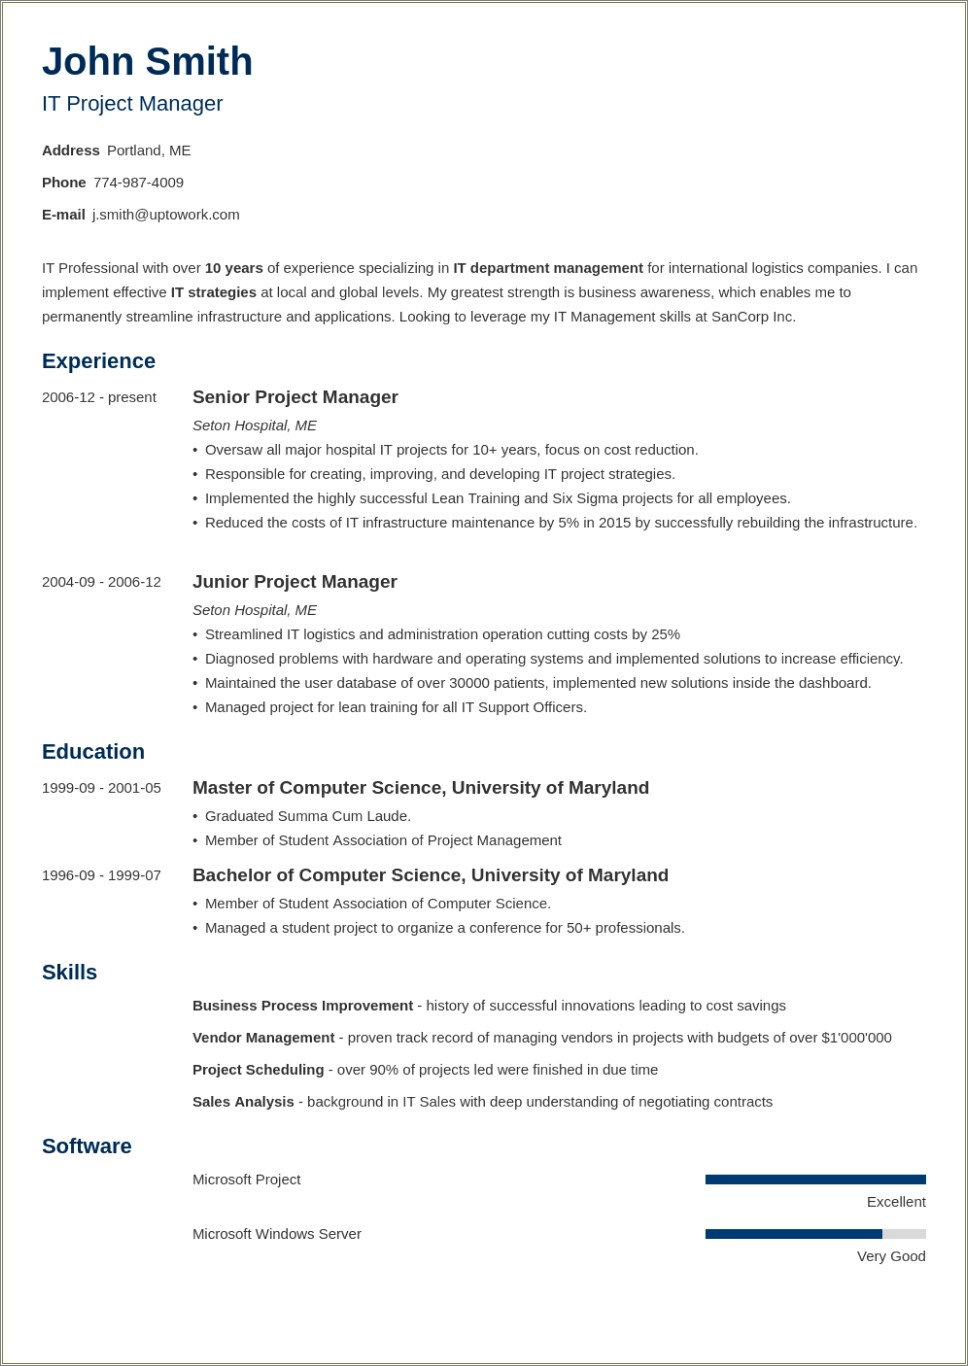 Resume Format For Conference Content Management Job